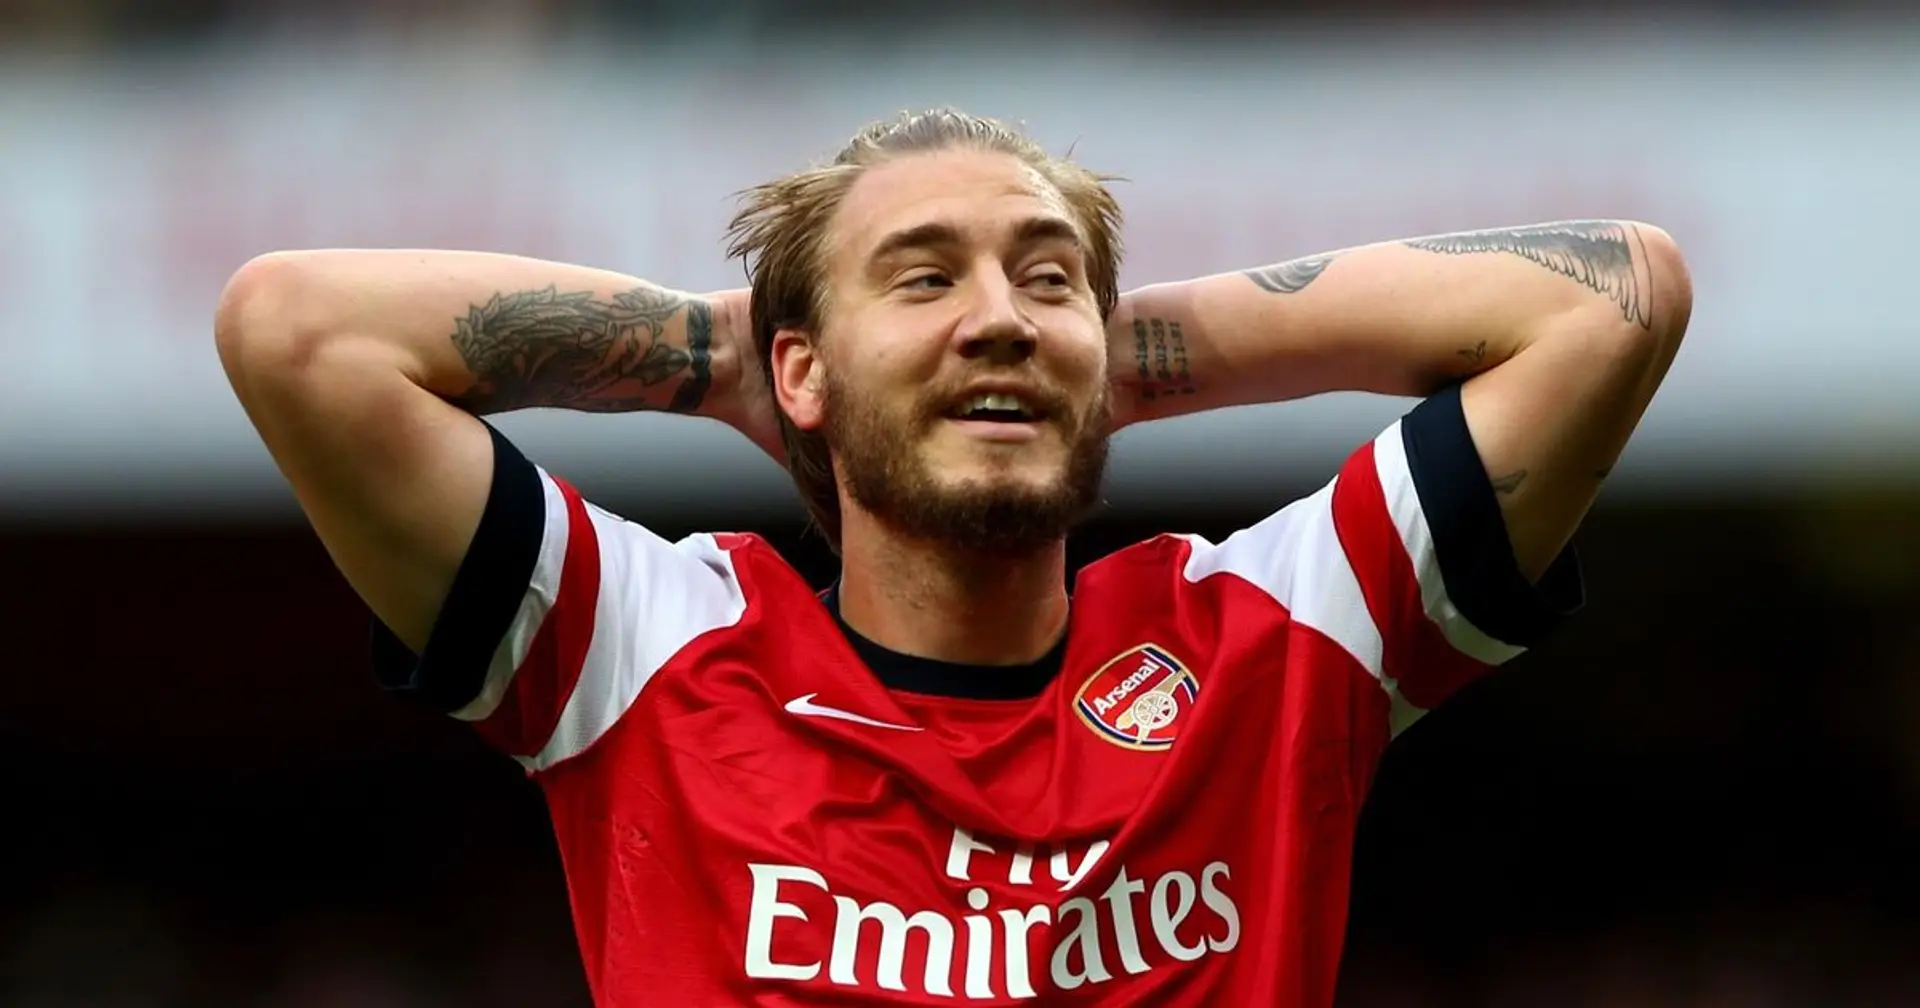 Nicklas Bendtner 'charged with 7 offences' including driving without license